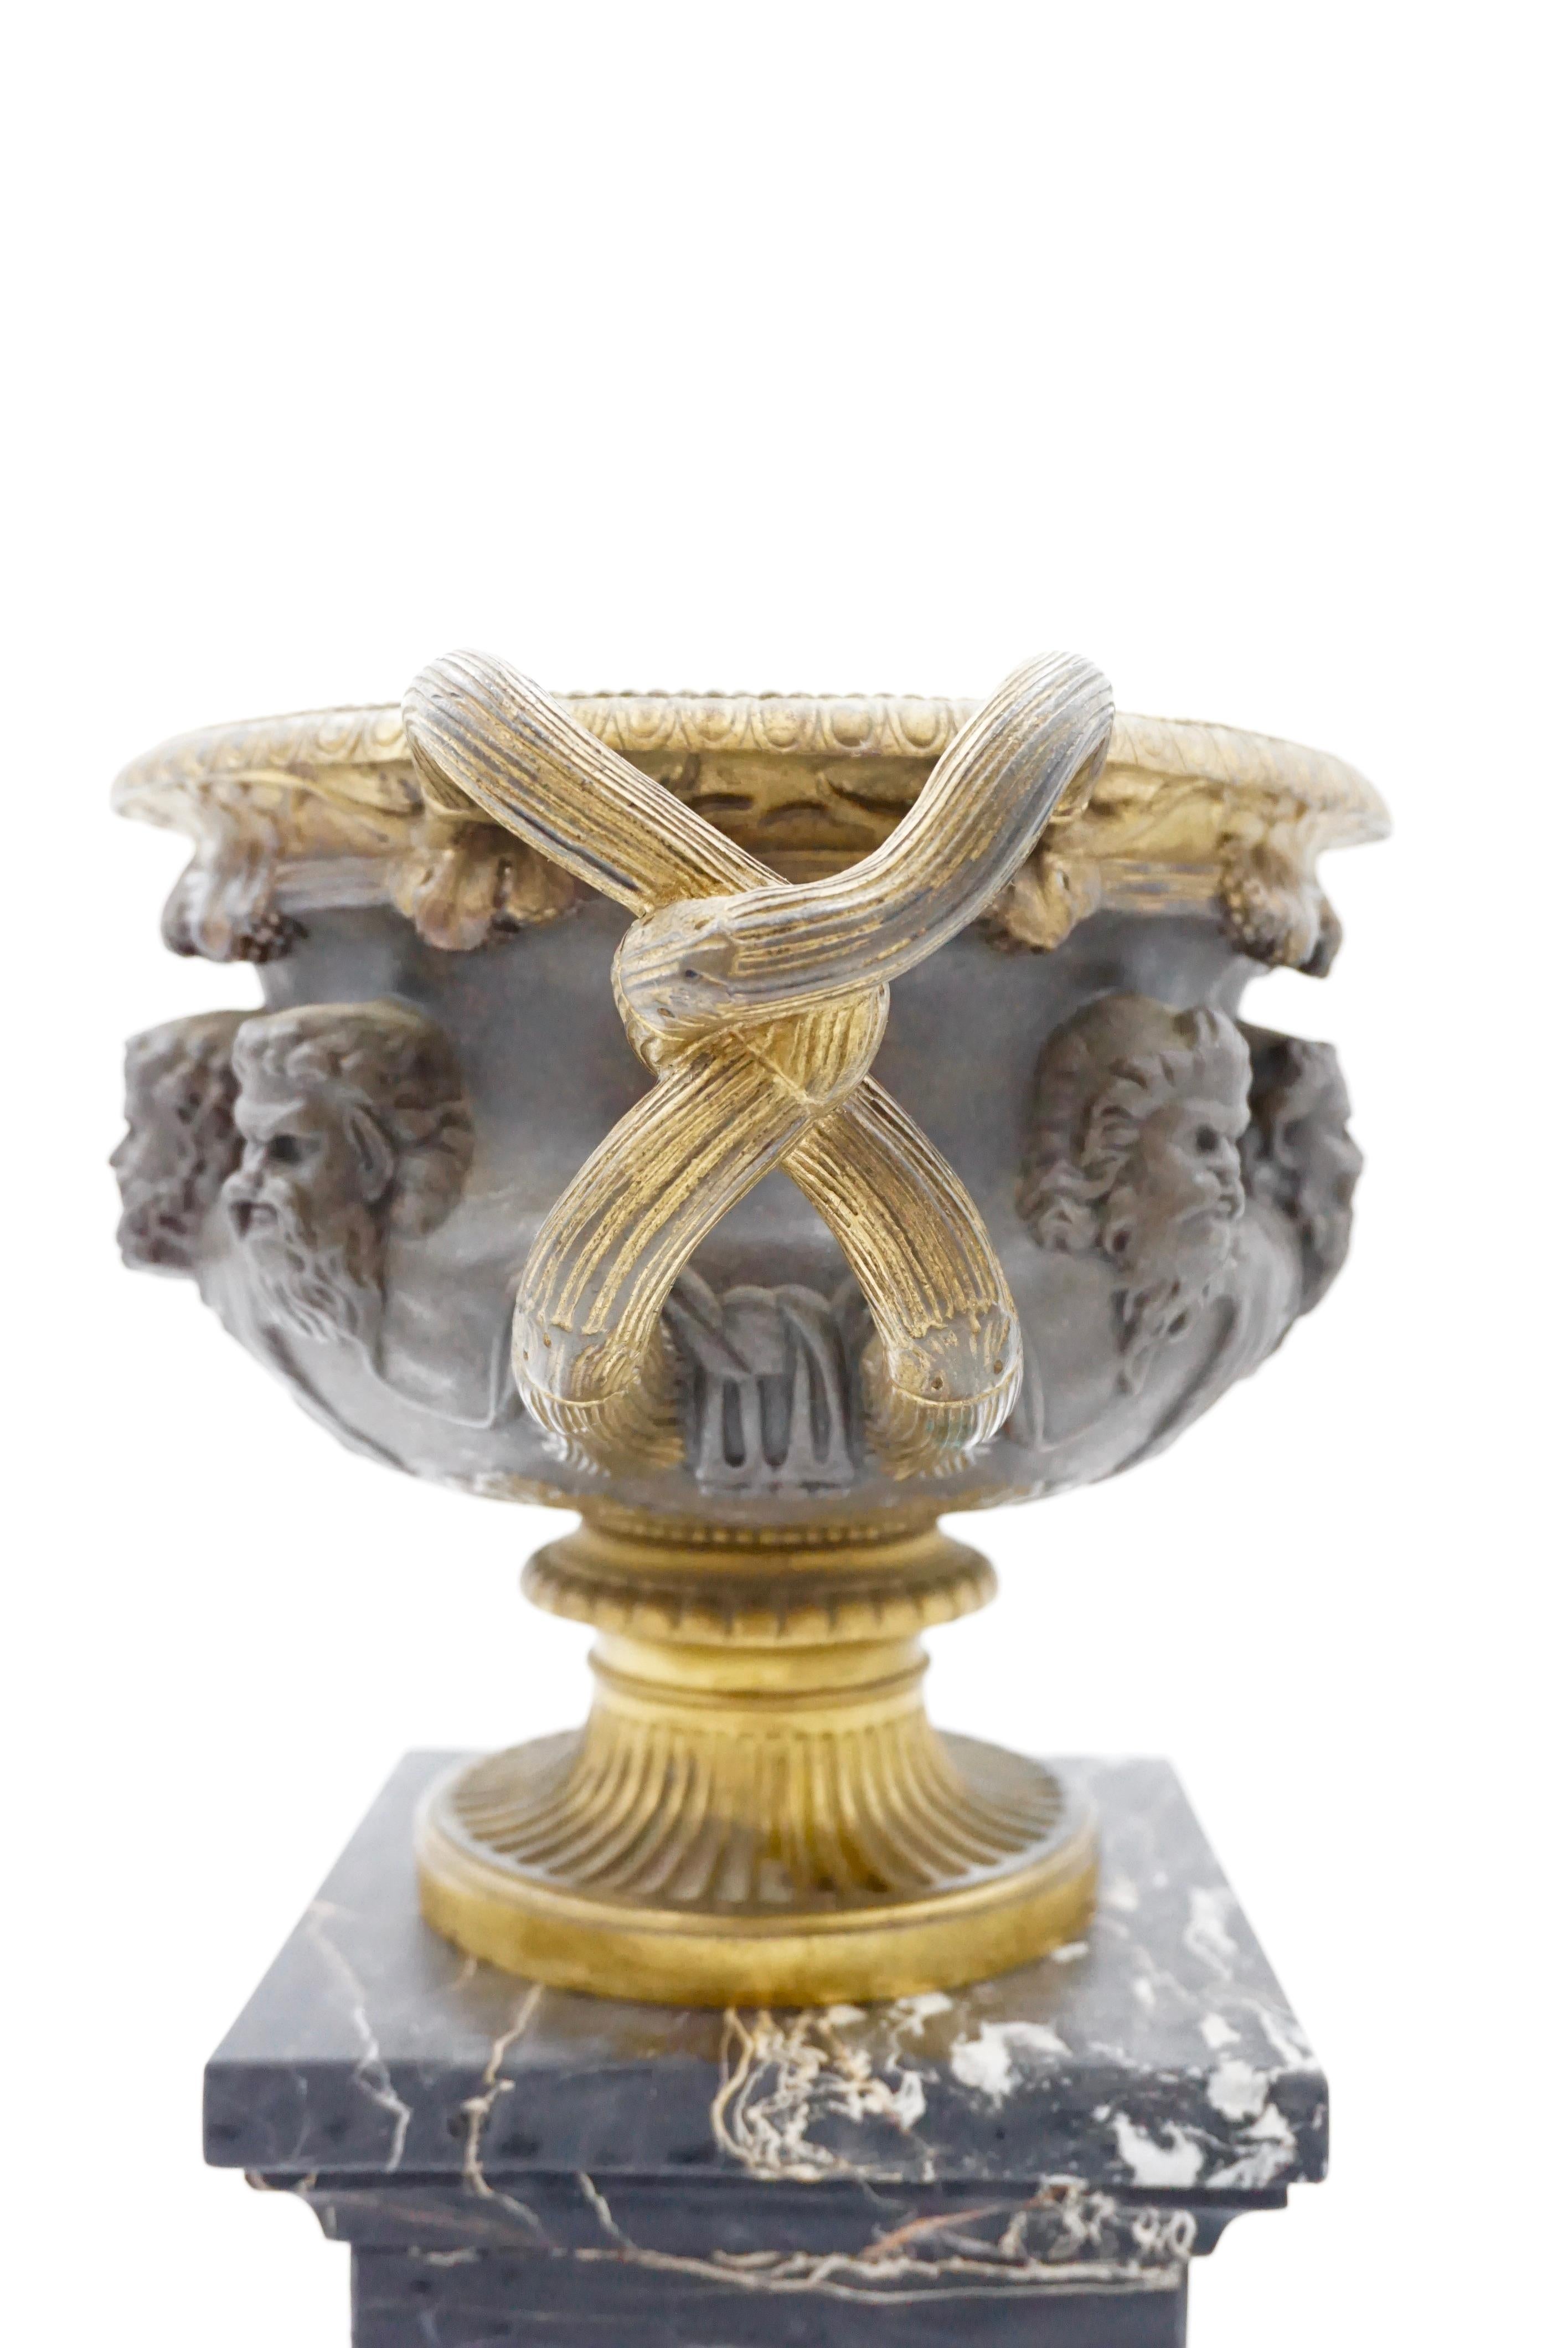 Bronze and Gilt Warwick Vase Lamp on Portoro Marble Basis, by Barbadienne, 1860 For Sale 3